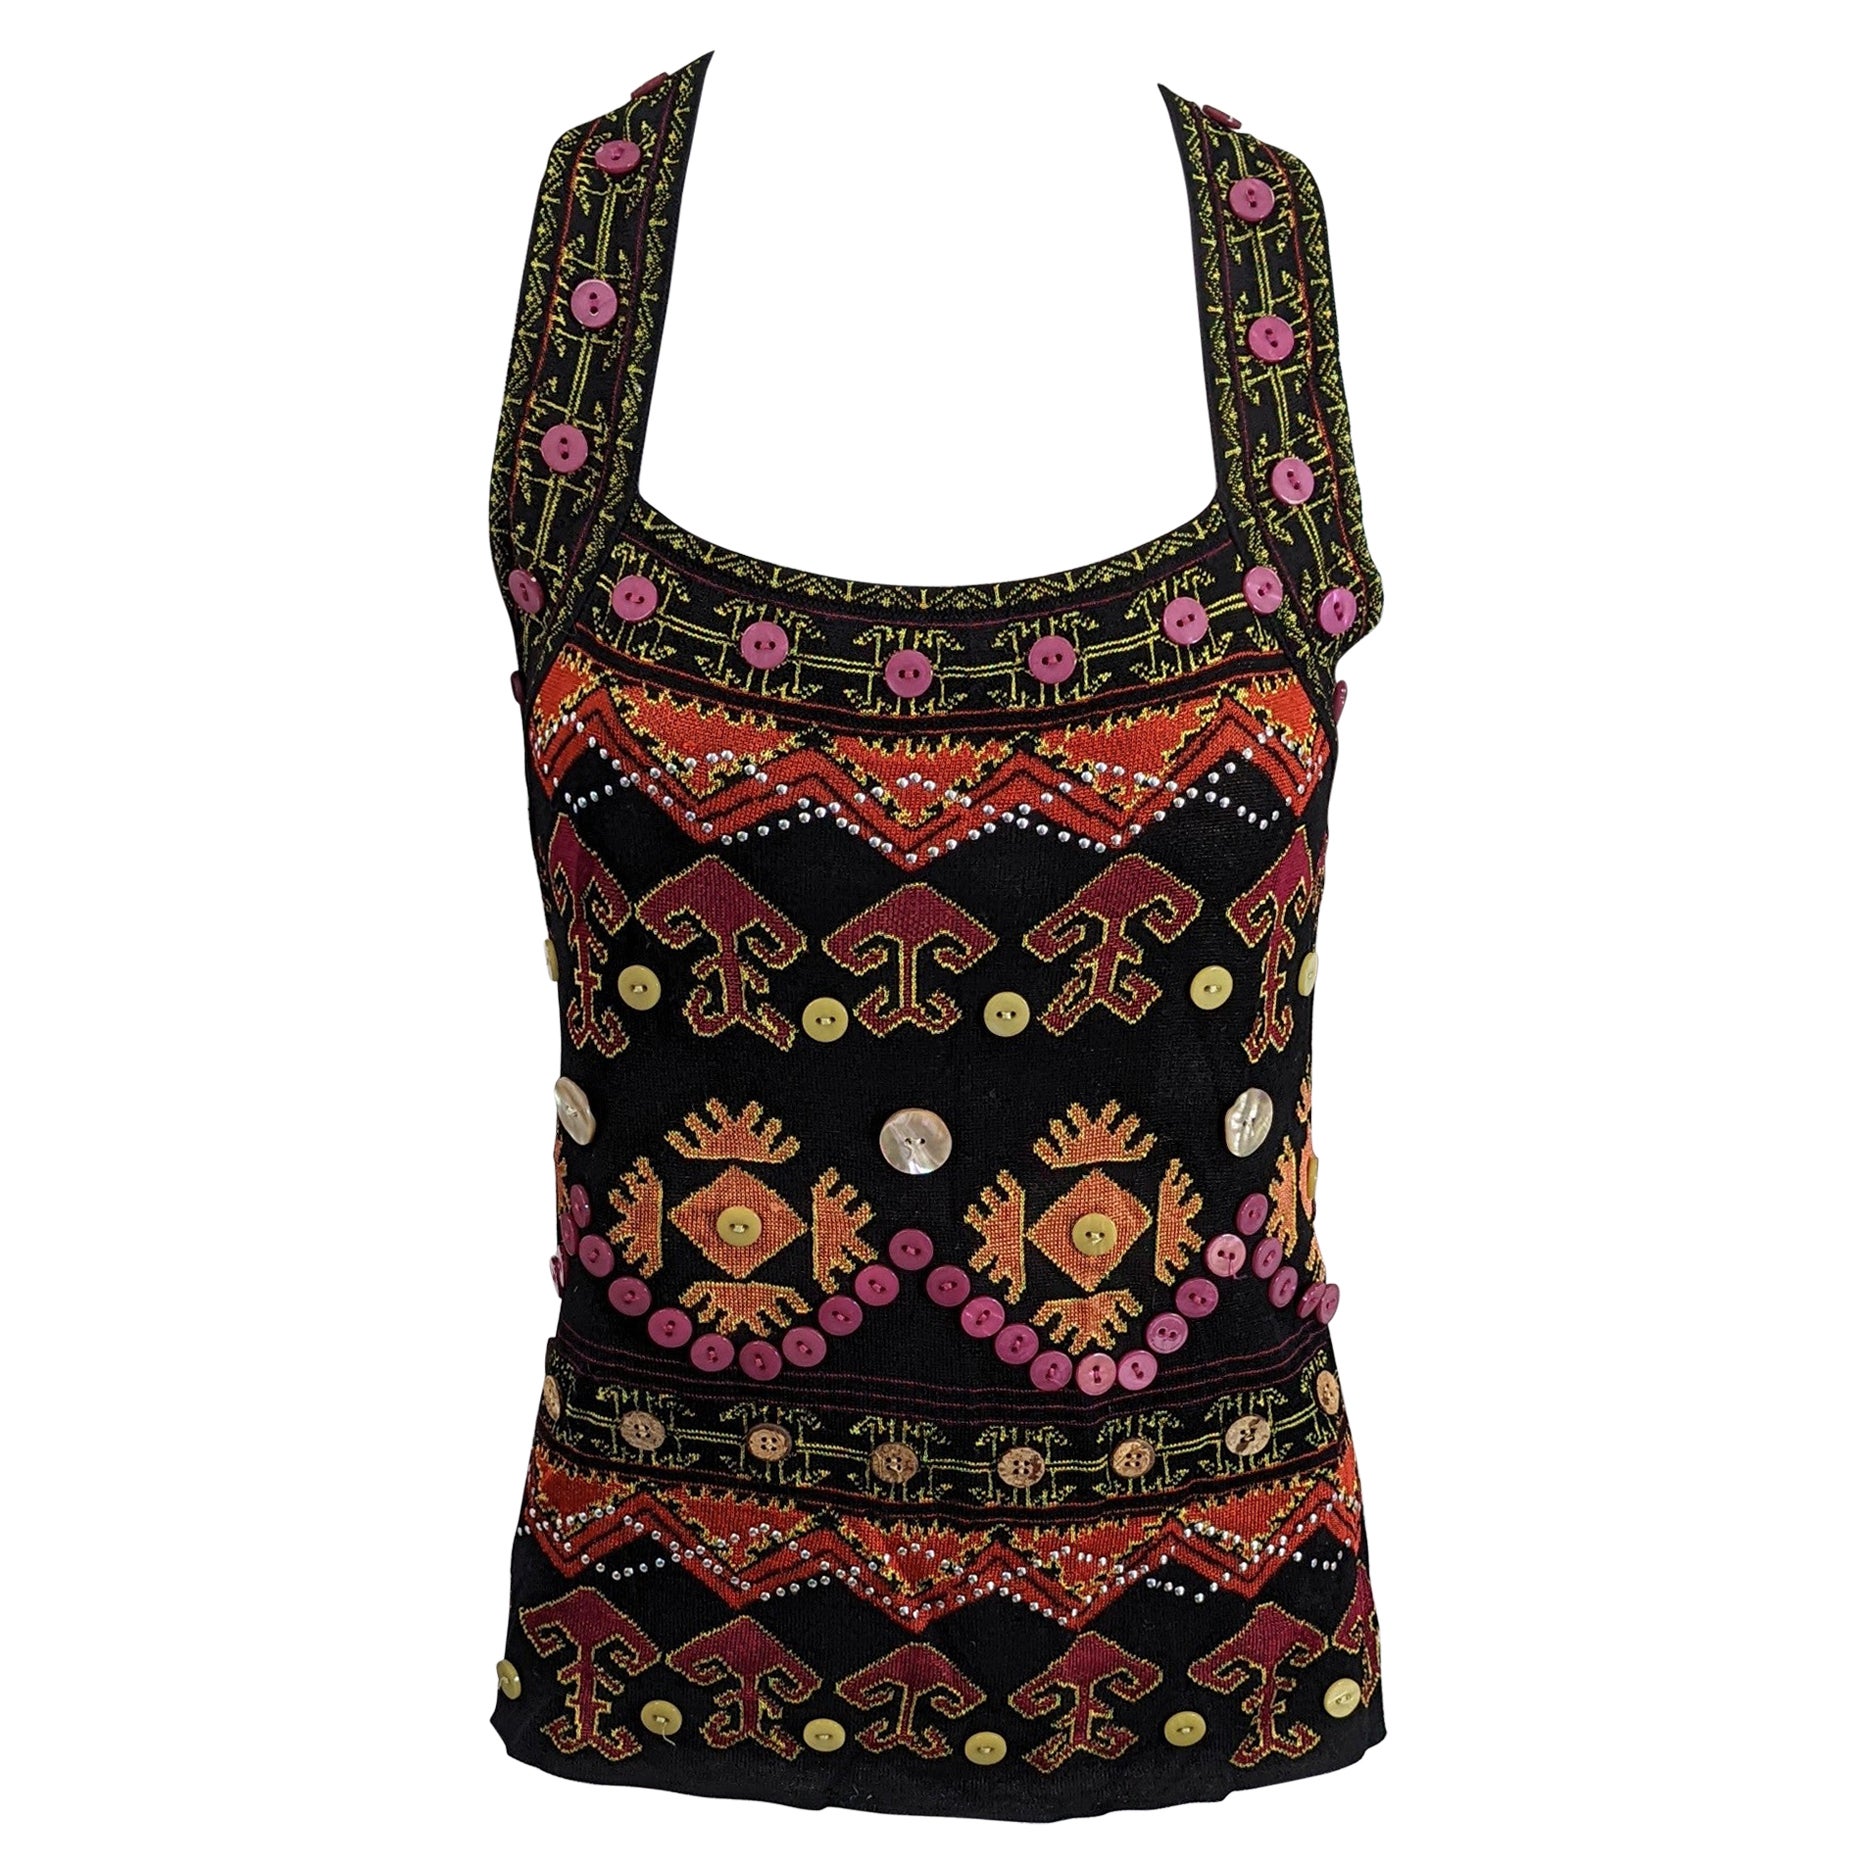 Christian Dior by Galliano Fall-Winter 2002 Ethnic Motif Knit Top For Sale